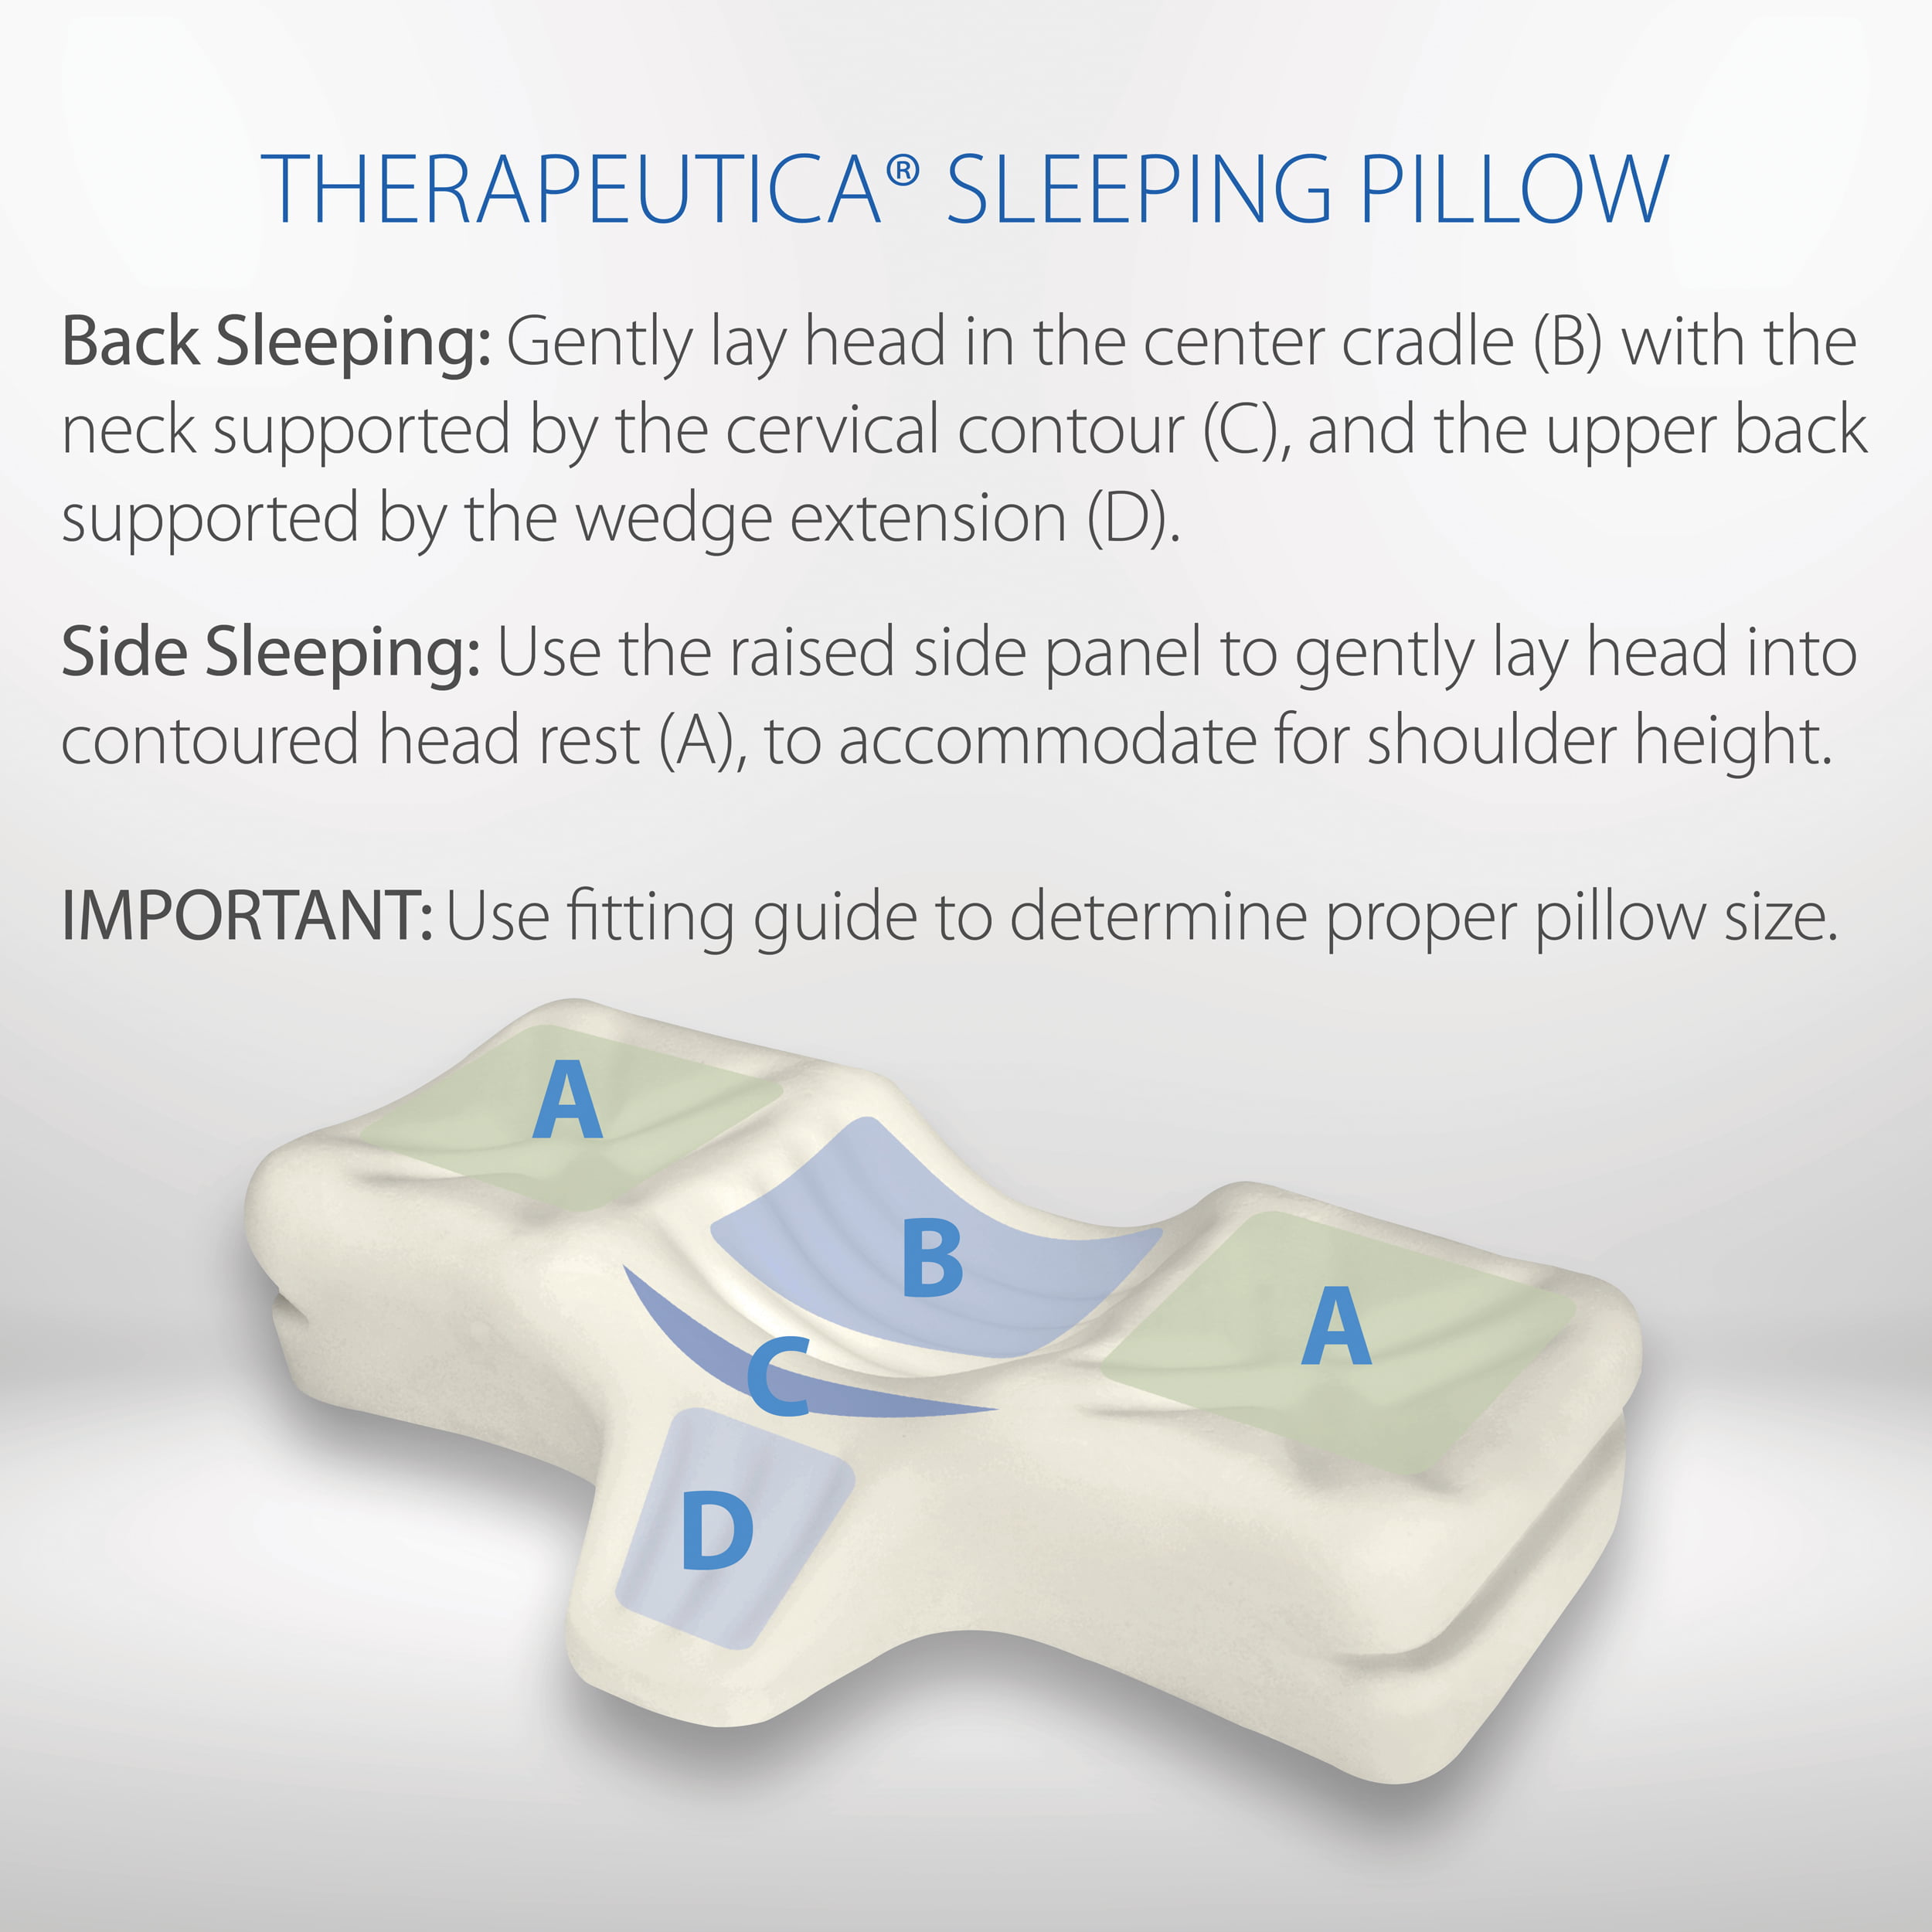 Therapeutic Sleeping Pillow For Therapy While You Sleep